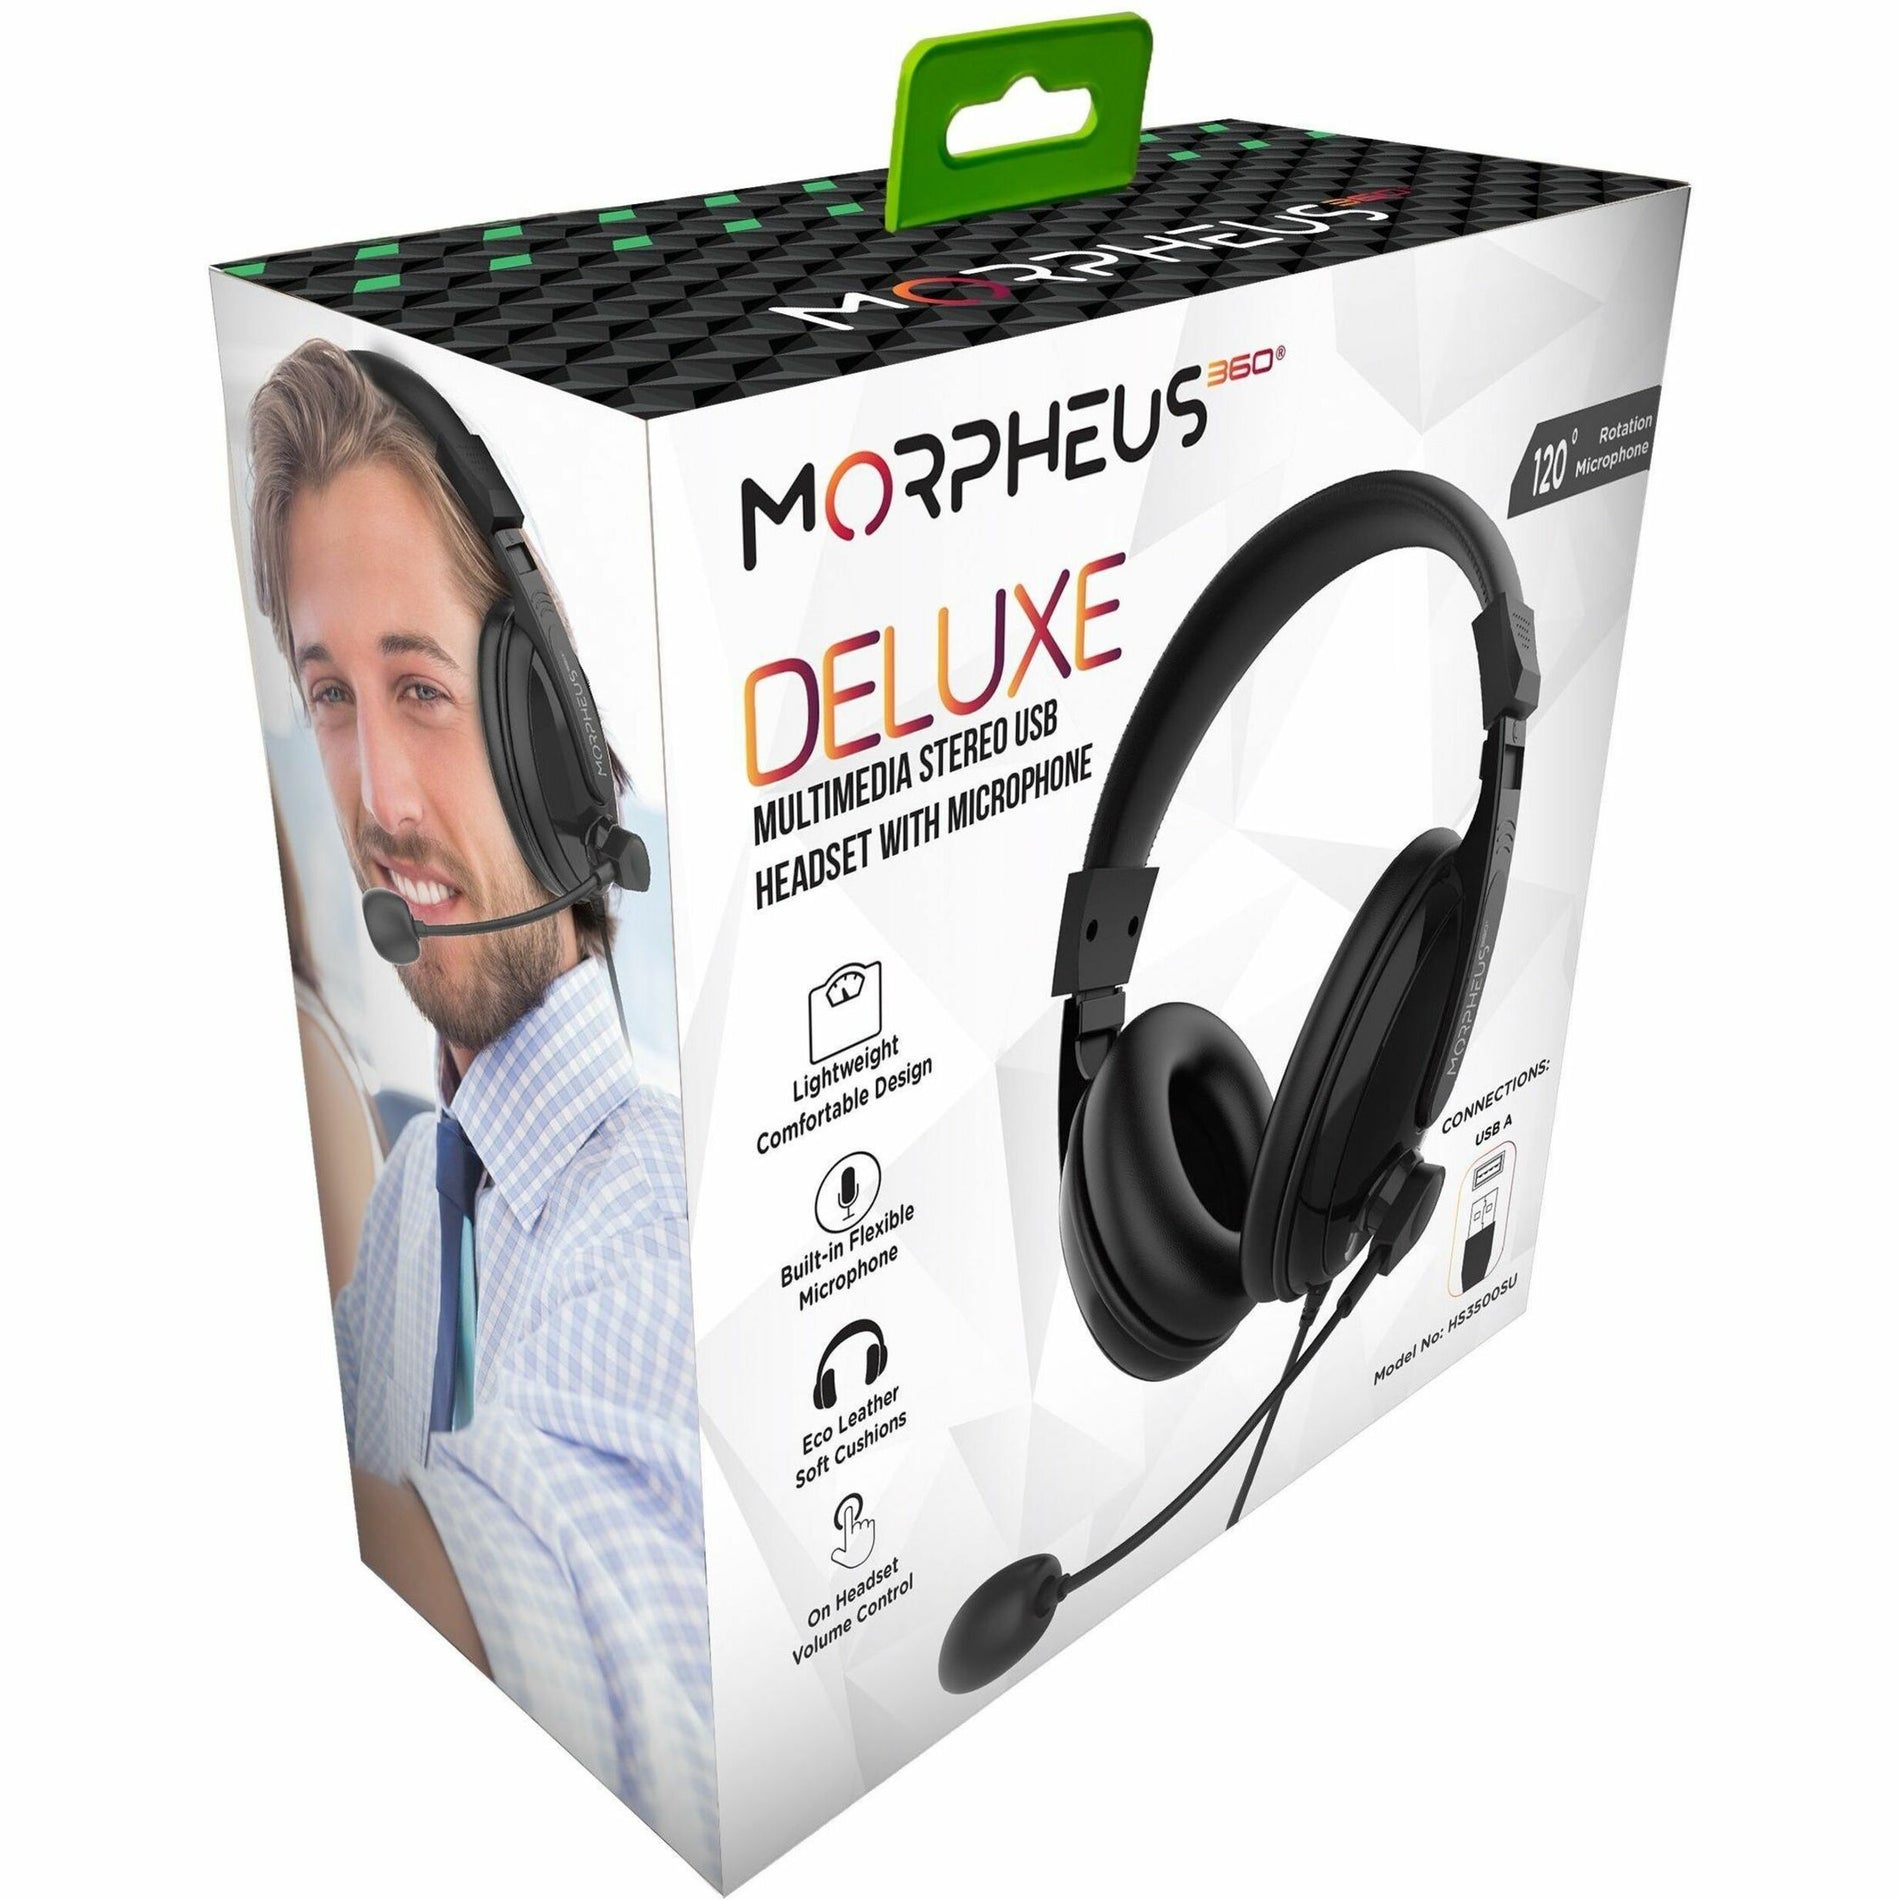 Morpheus 360 HS3500SU Deluxe Multimedia Stereo USB Headset with Microphone, Comfortable, Lightweight, Flexible Microphone